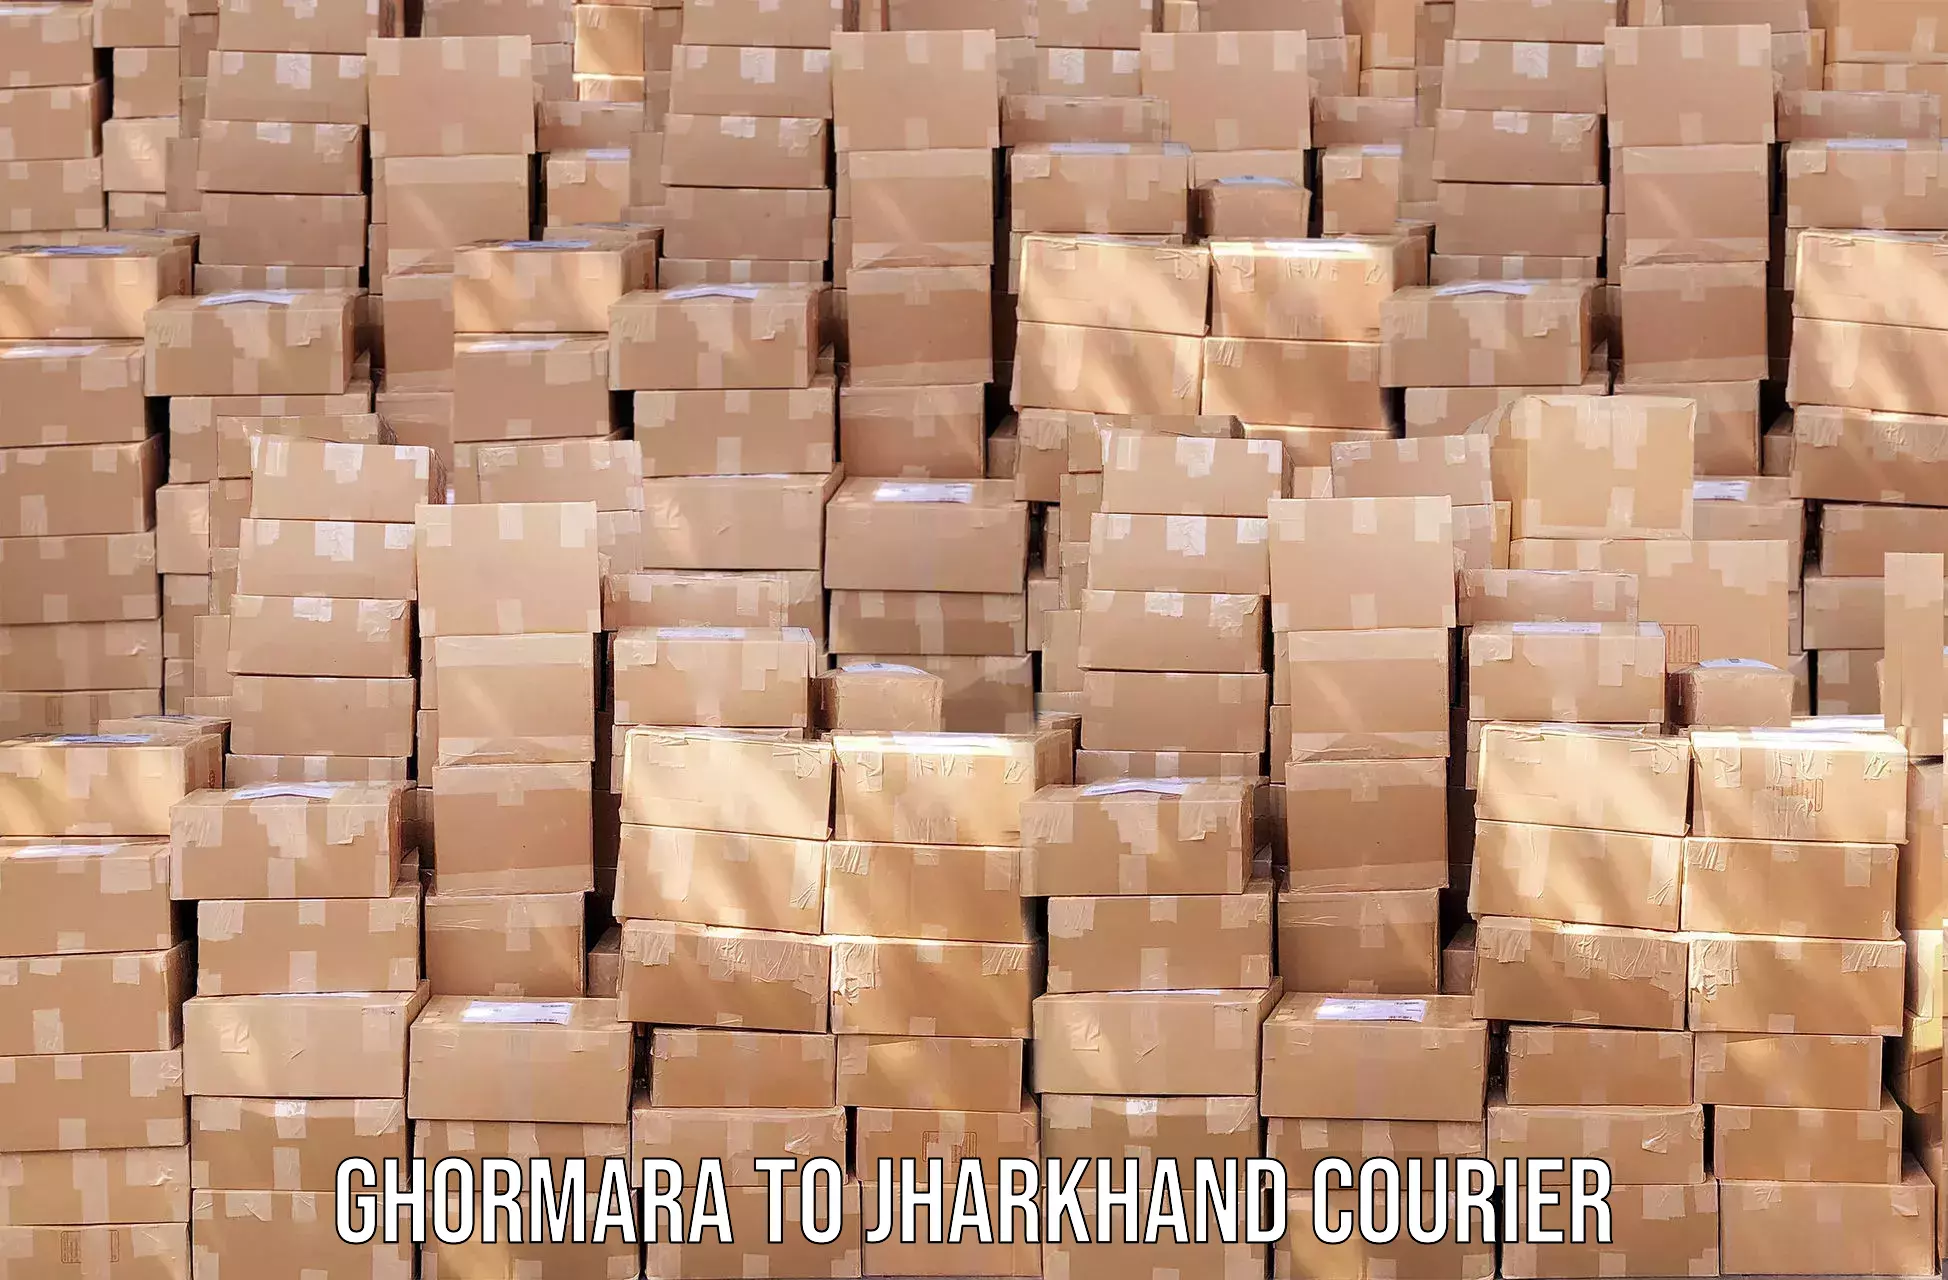 Courier service efficiency Ghormara to Latehar